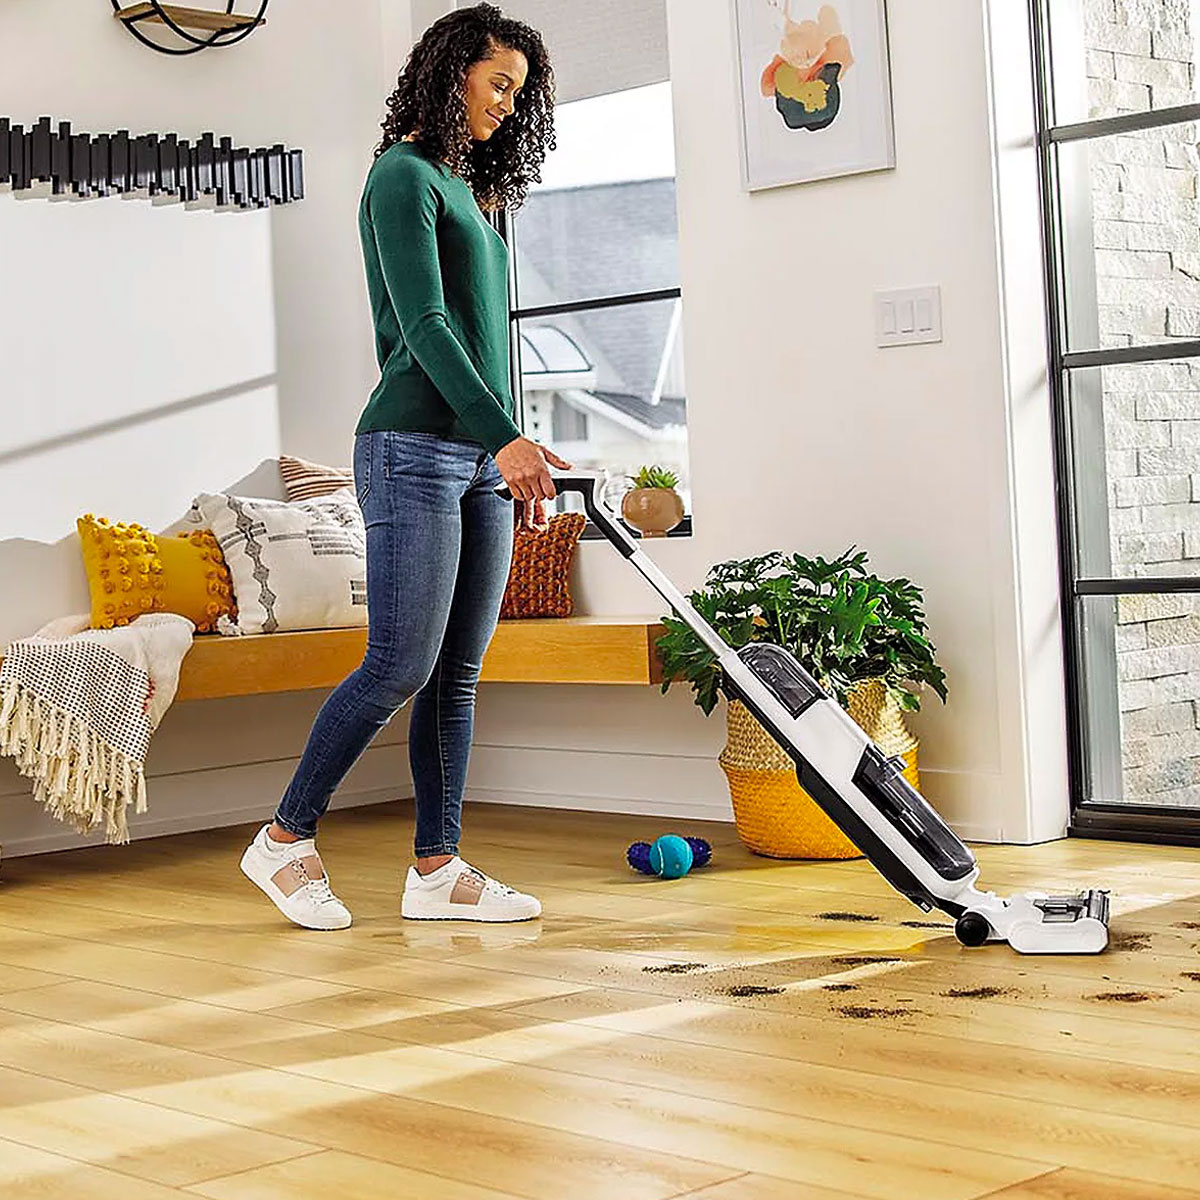 BISSELL TurboClean Cordless Hard Floor Cleaner Mop and Vacuum $179.99  Shipped Free (Reg. $349.99) - Fabulessly Frugal